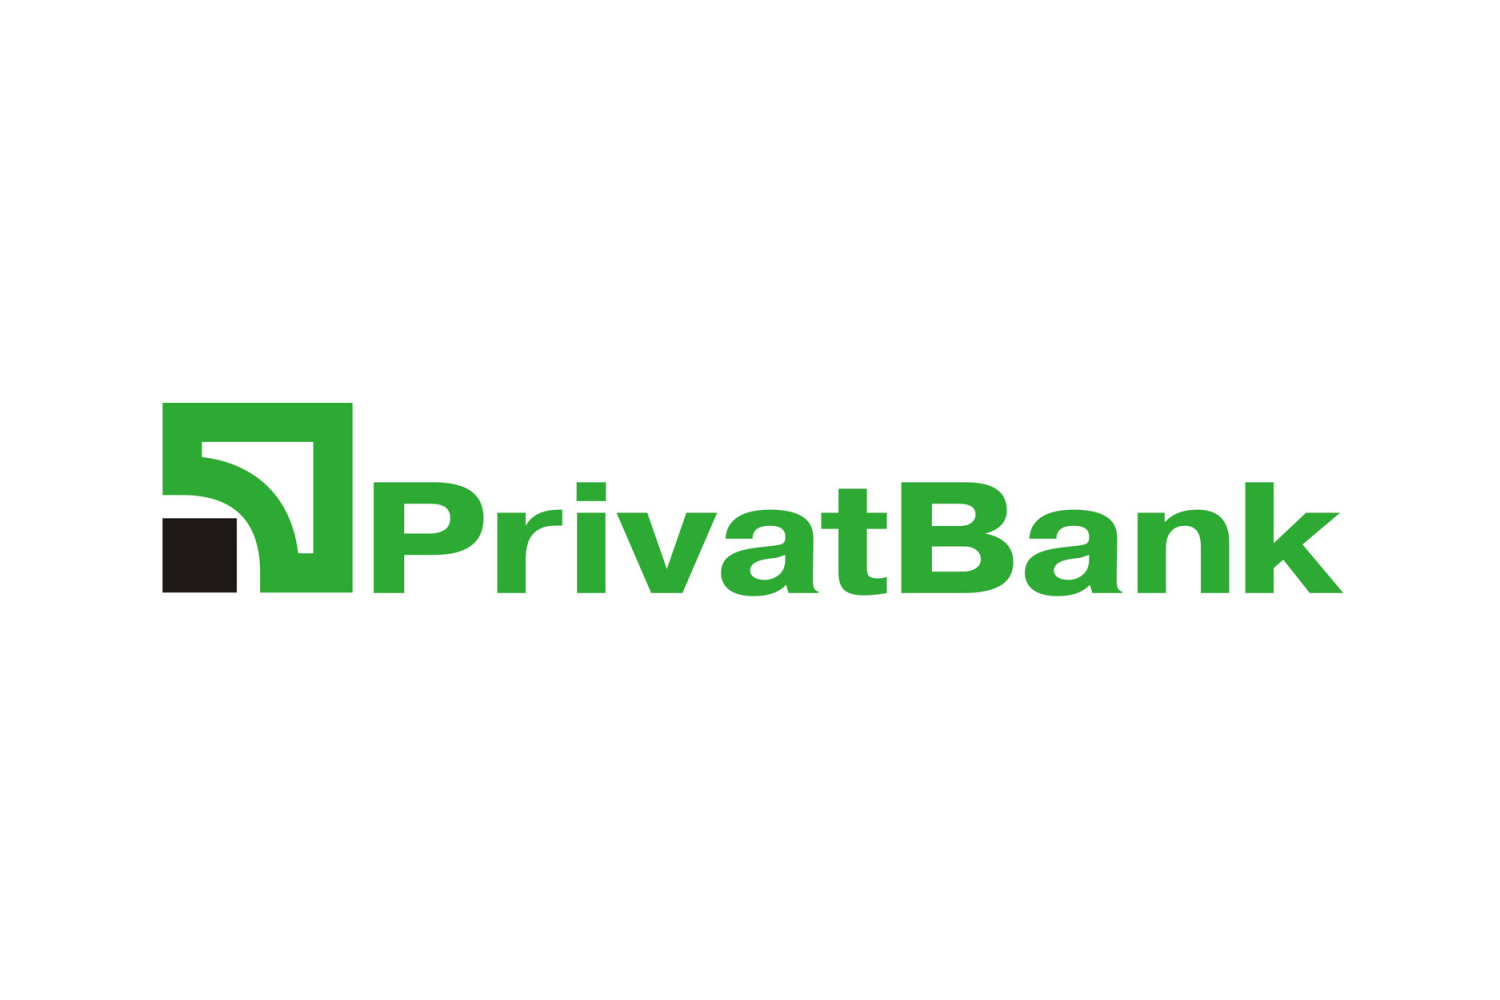 Planned work, services PrivatBank will be unavailable